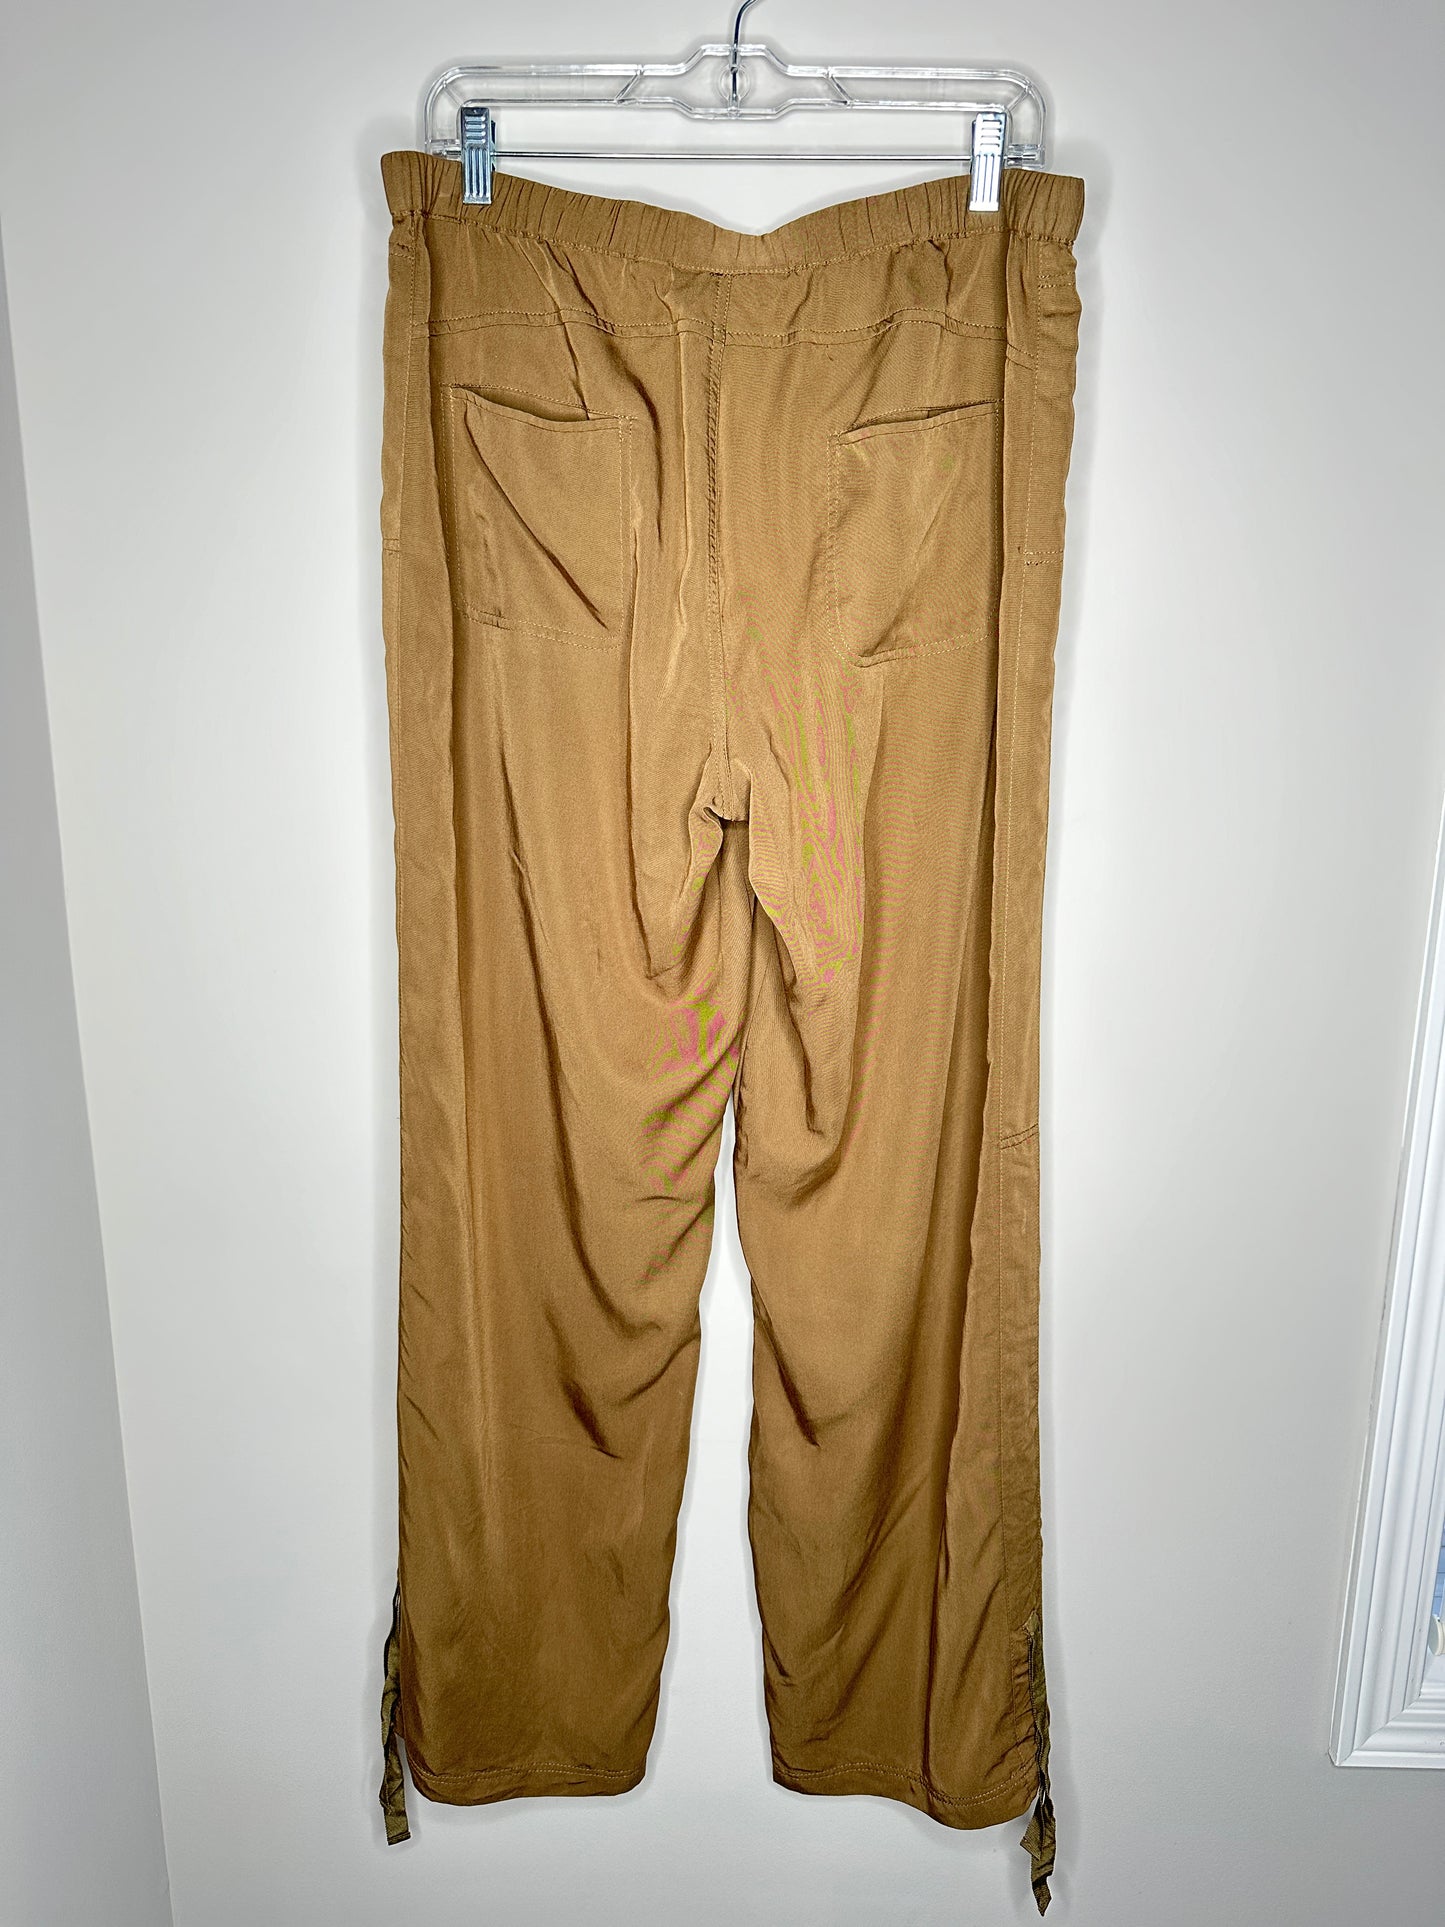 Belle Gray by Lisa Rinna Size L Taupe Light Brown Elastic Waist Pants